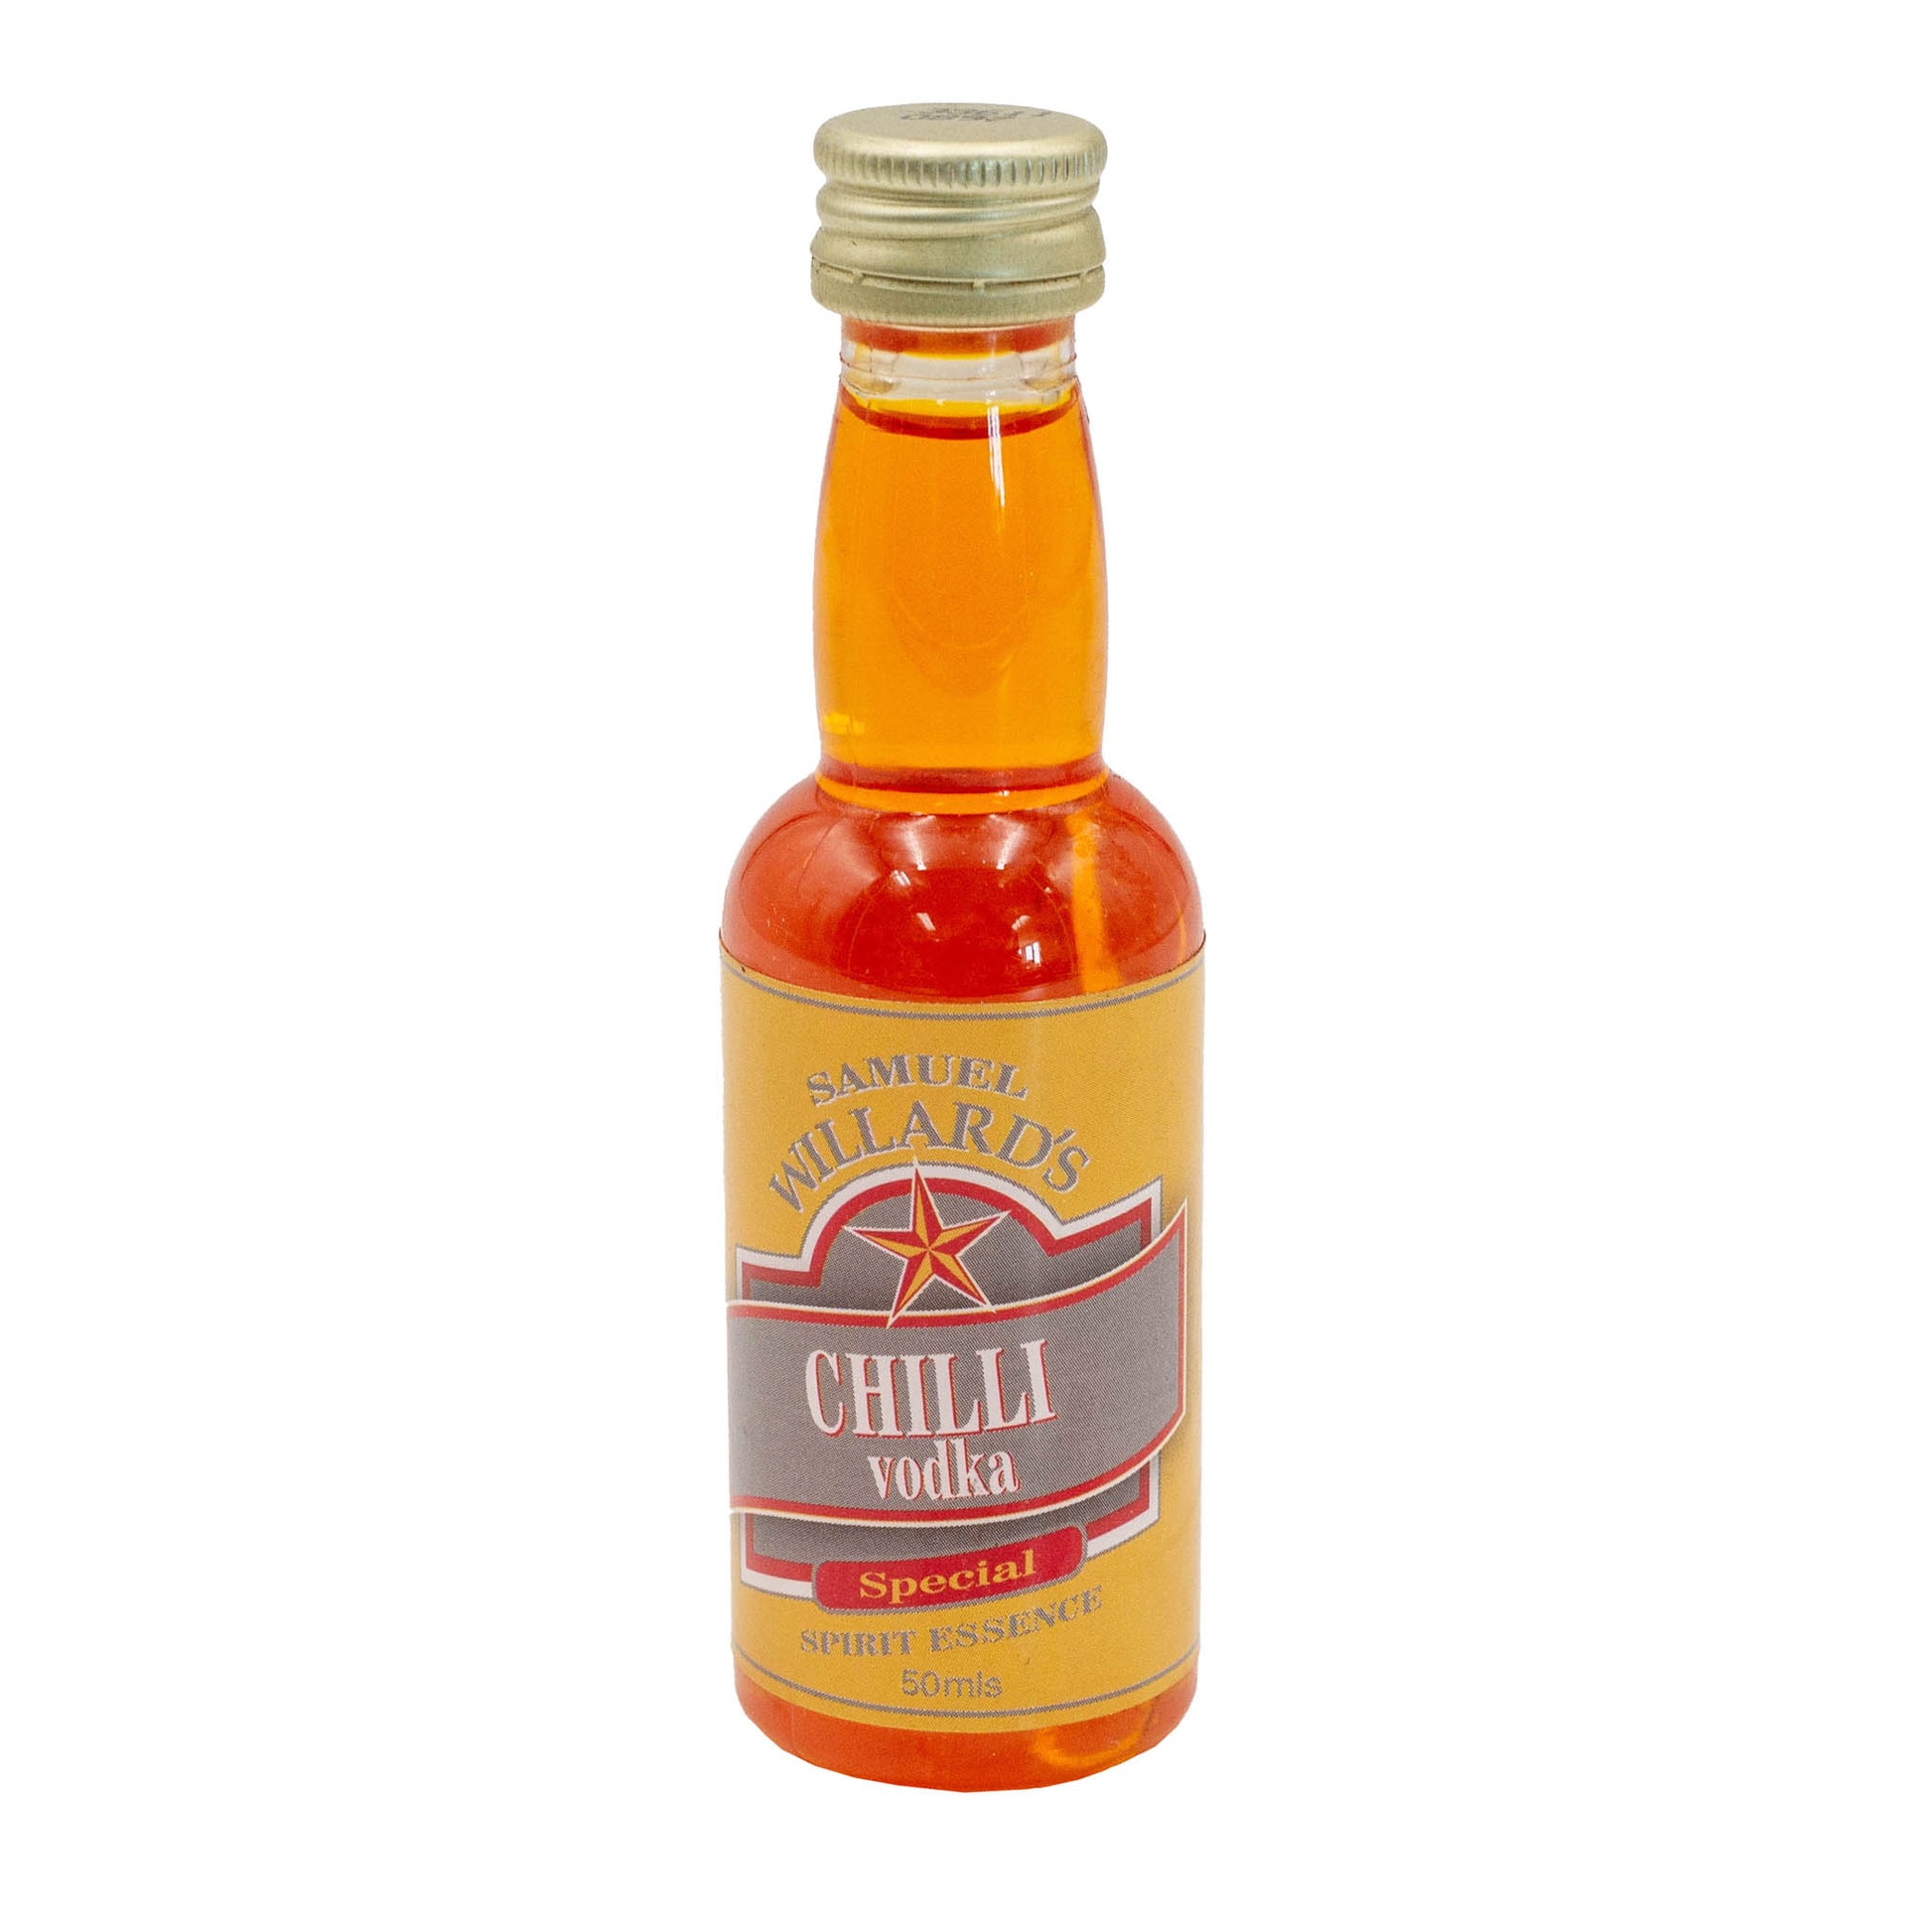 Samuel Willards gold star Chilli Vodka will make 1125ml of finished product from each 50ml bottle